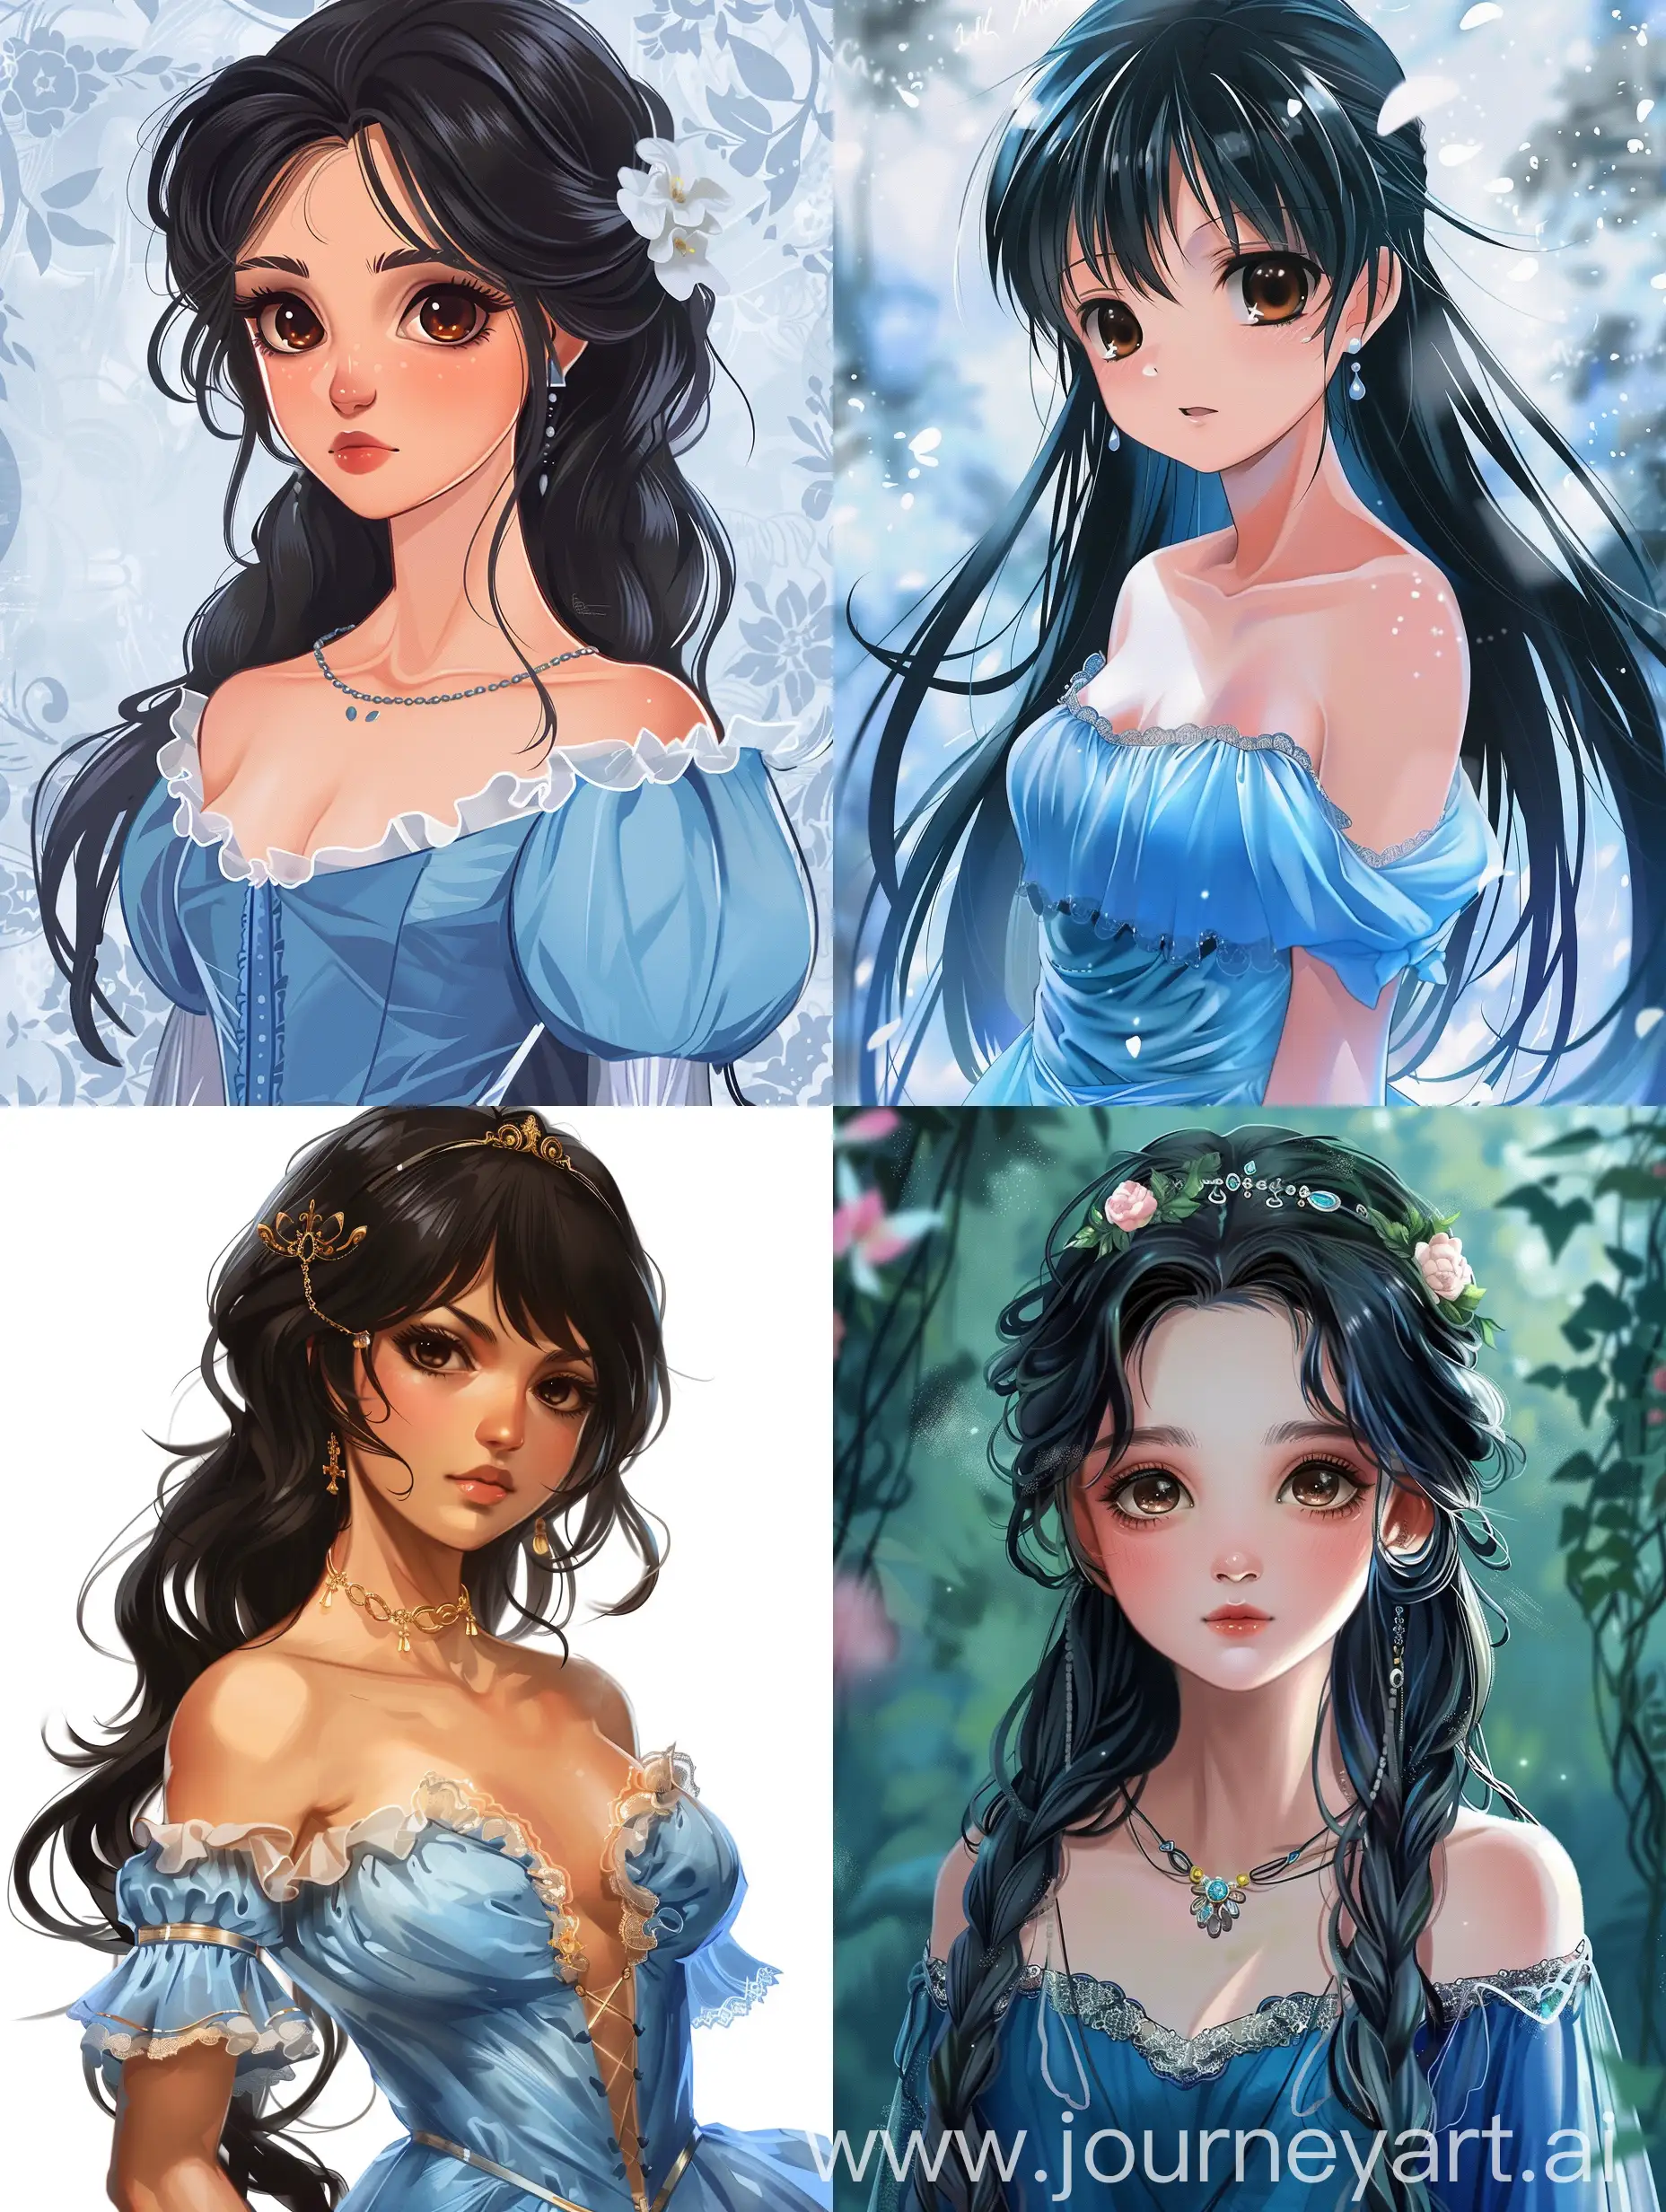 A commoner girl in a royal ball, with pretty blue dress and she has black and long hair, she has brown eyes